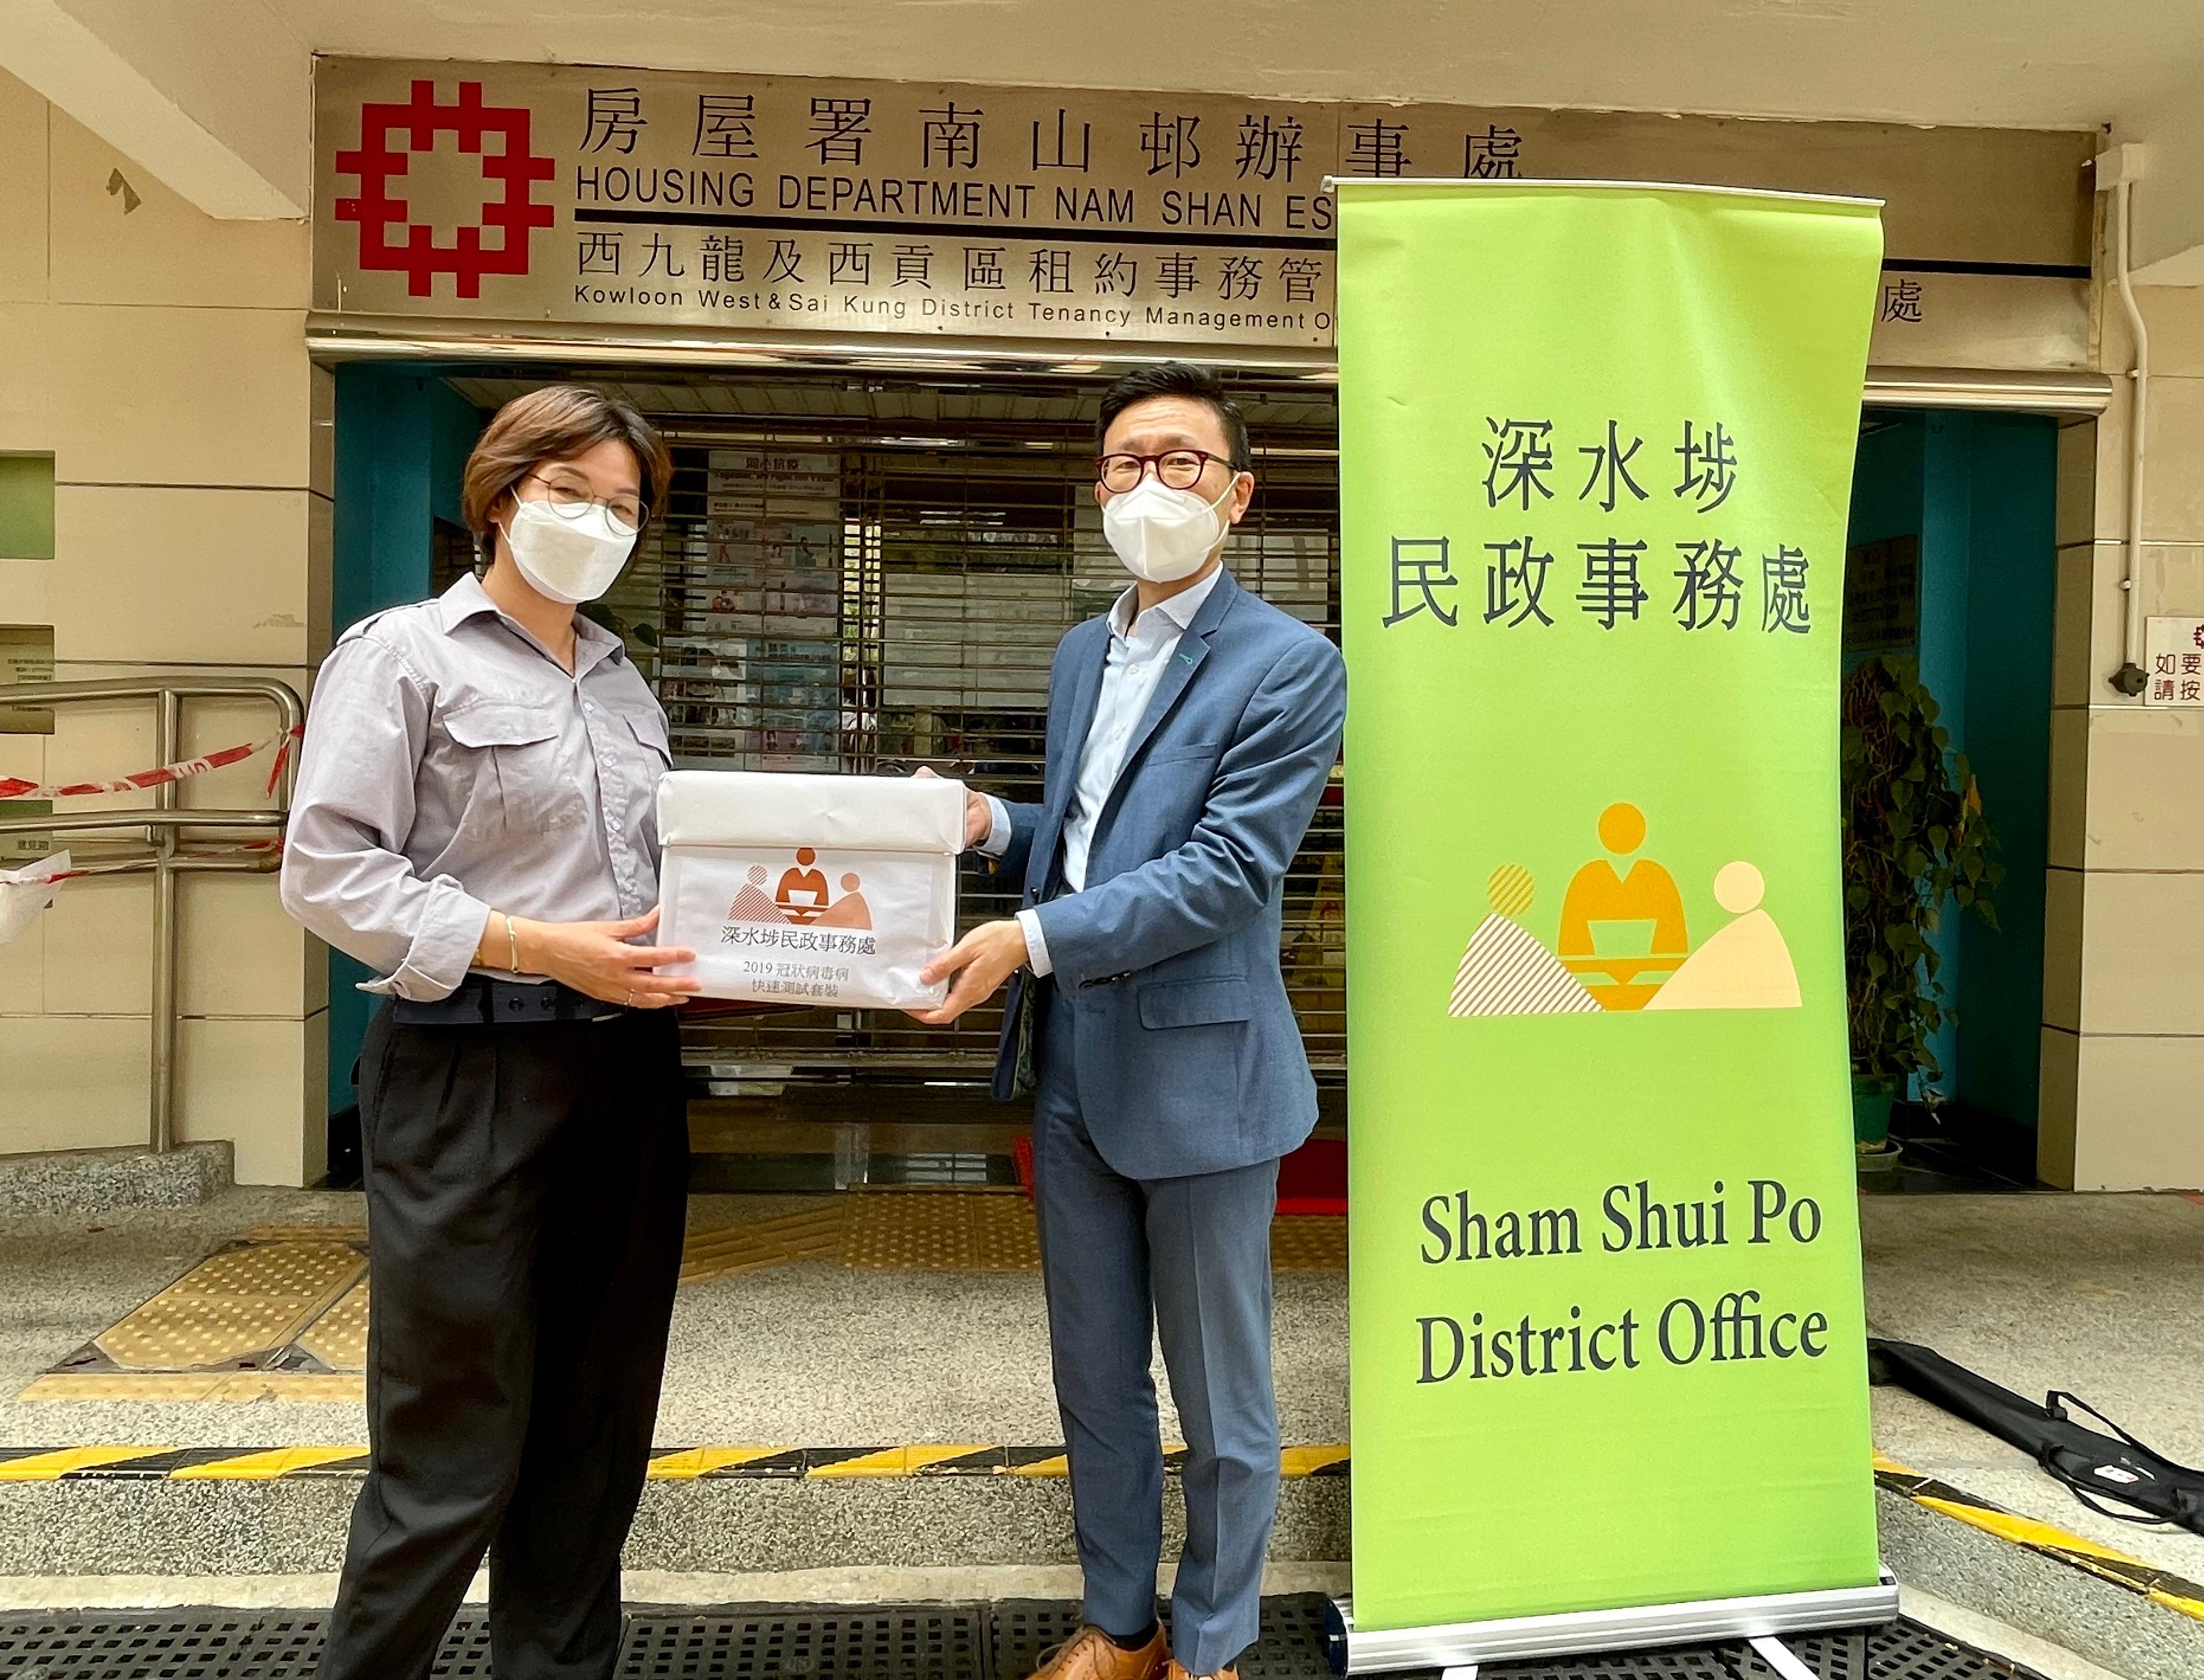 The Sham Shui Po District Office today (March 6) distributed COVID-19 rapid test kits to households, cleansing workers and property management staff living and working in Nam Shan Estate for voluntary testing through the Housing Department.